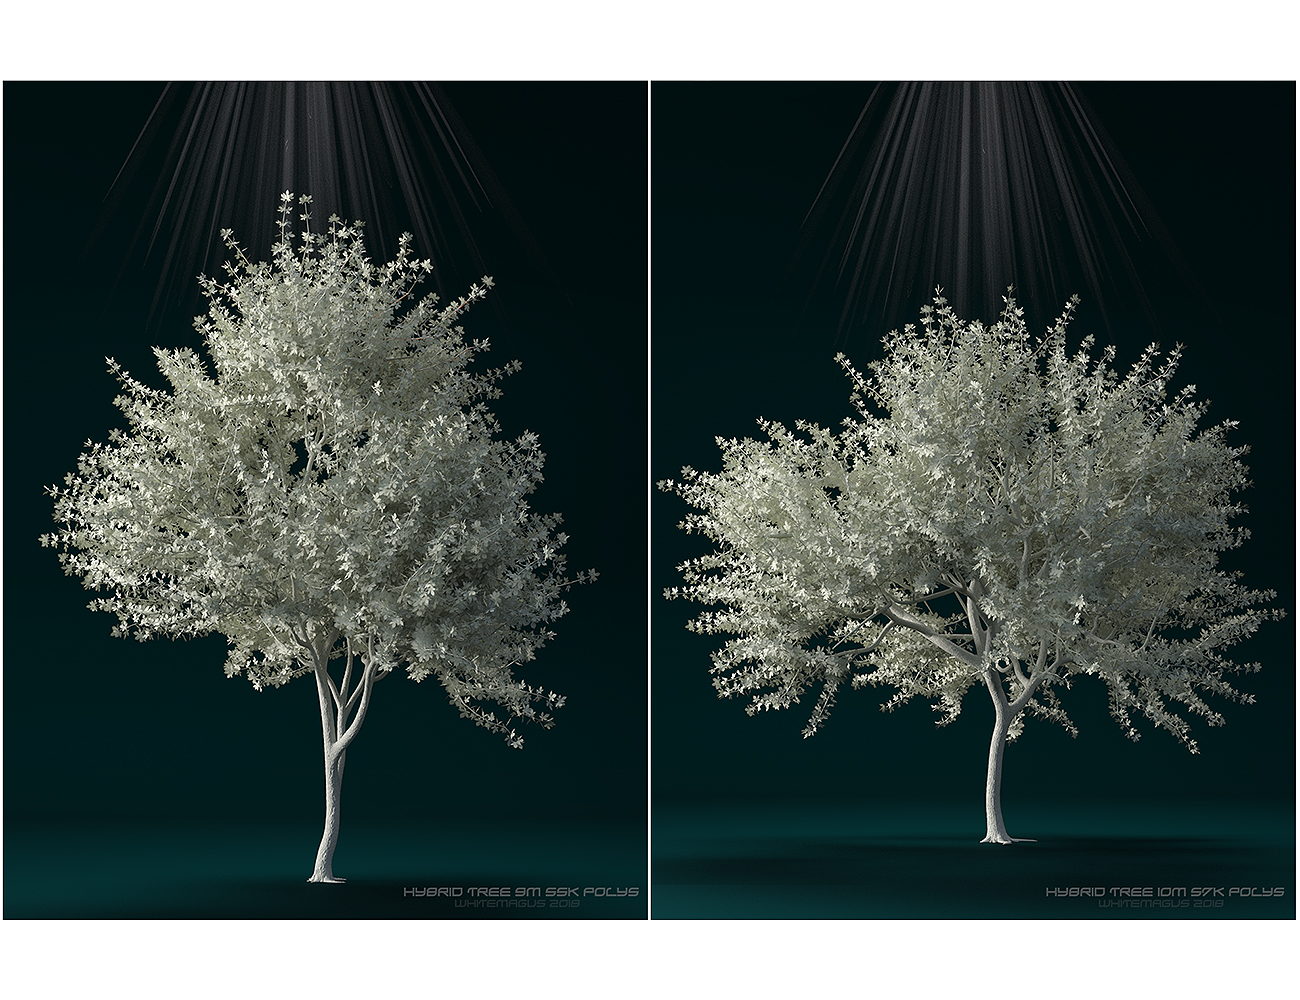 Hybrid Trees Ultimate by: Whitemagus, 3D Models by Daz 3D